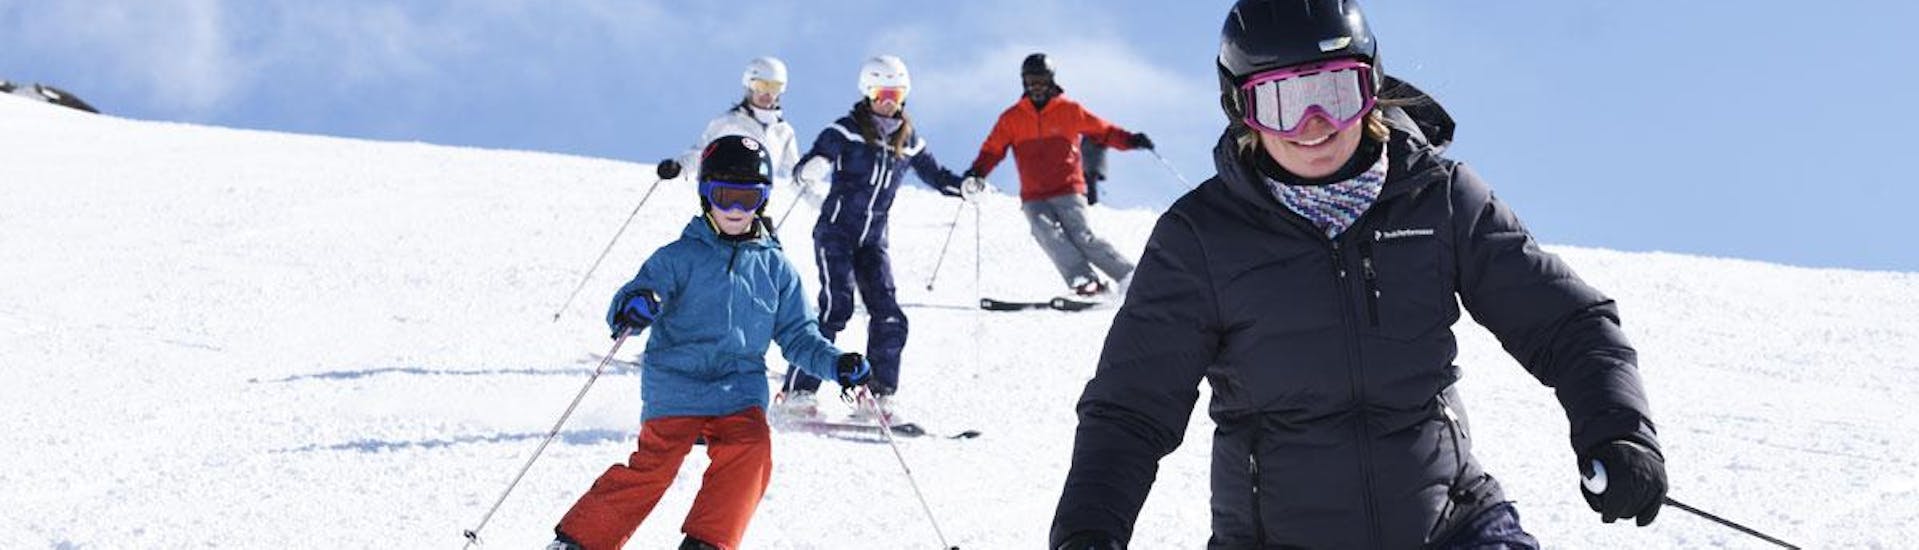 Ski Lessons for Kids (6-10 years) - All Levels.